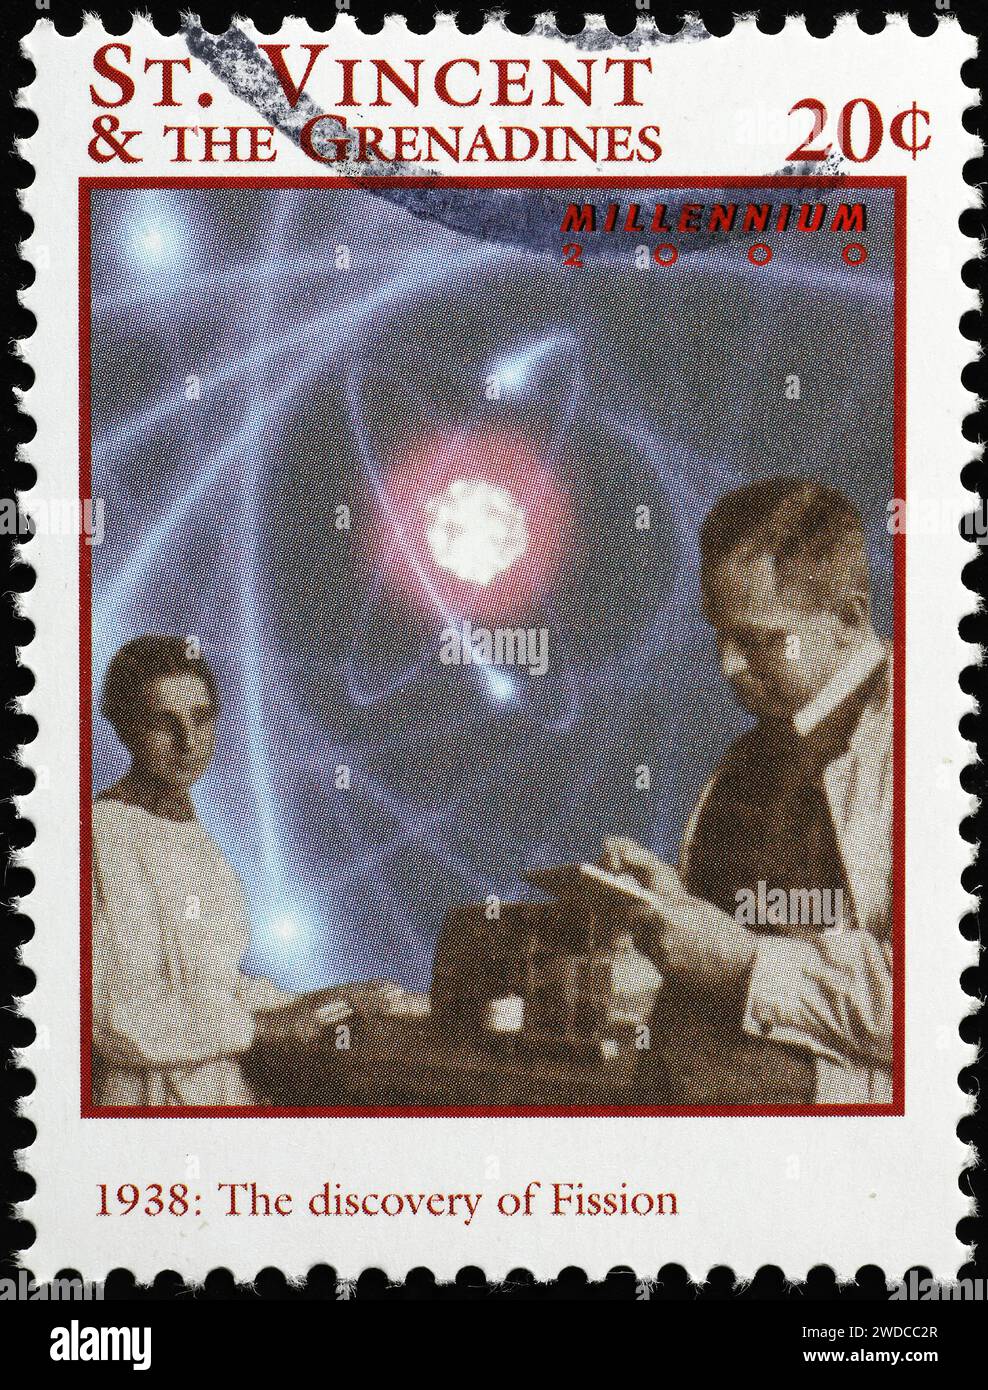 The discovery of fission in 1938 on postage stamp Stock Photo